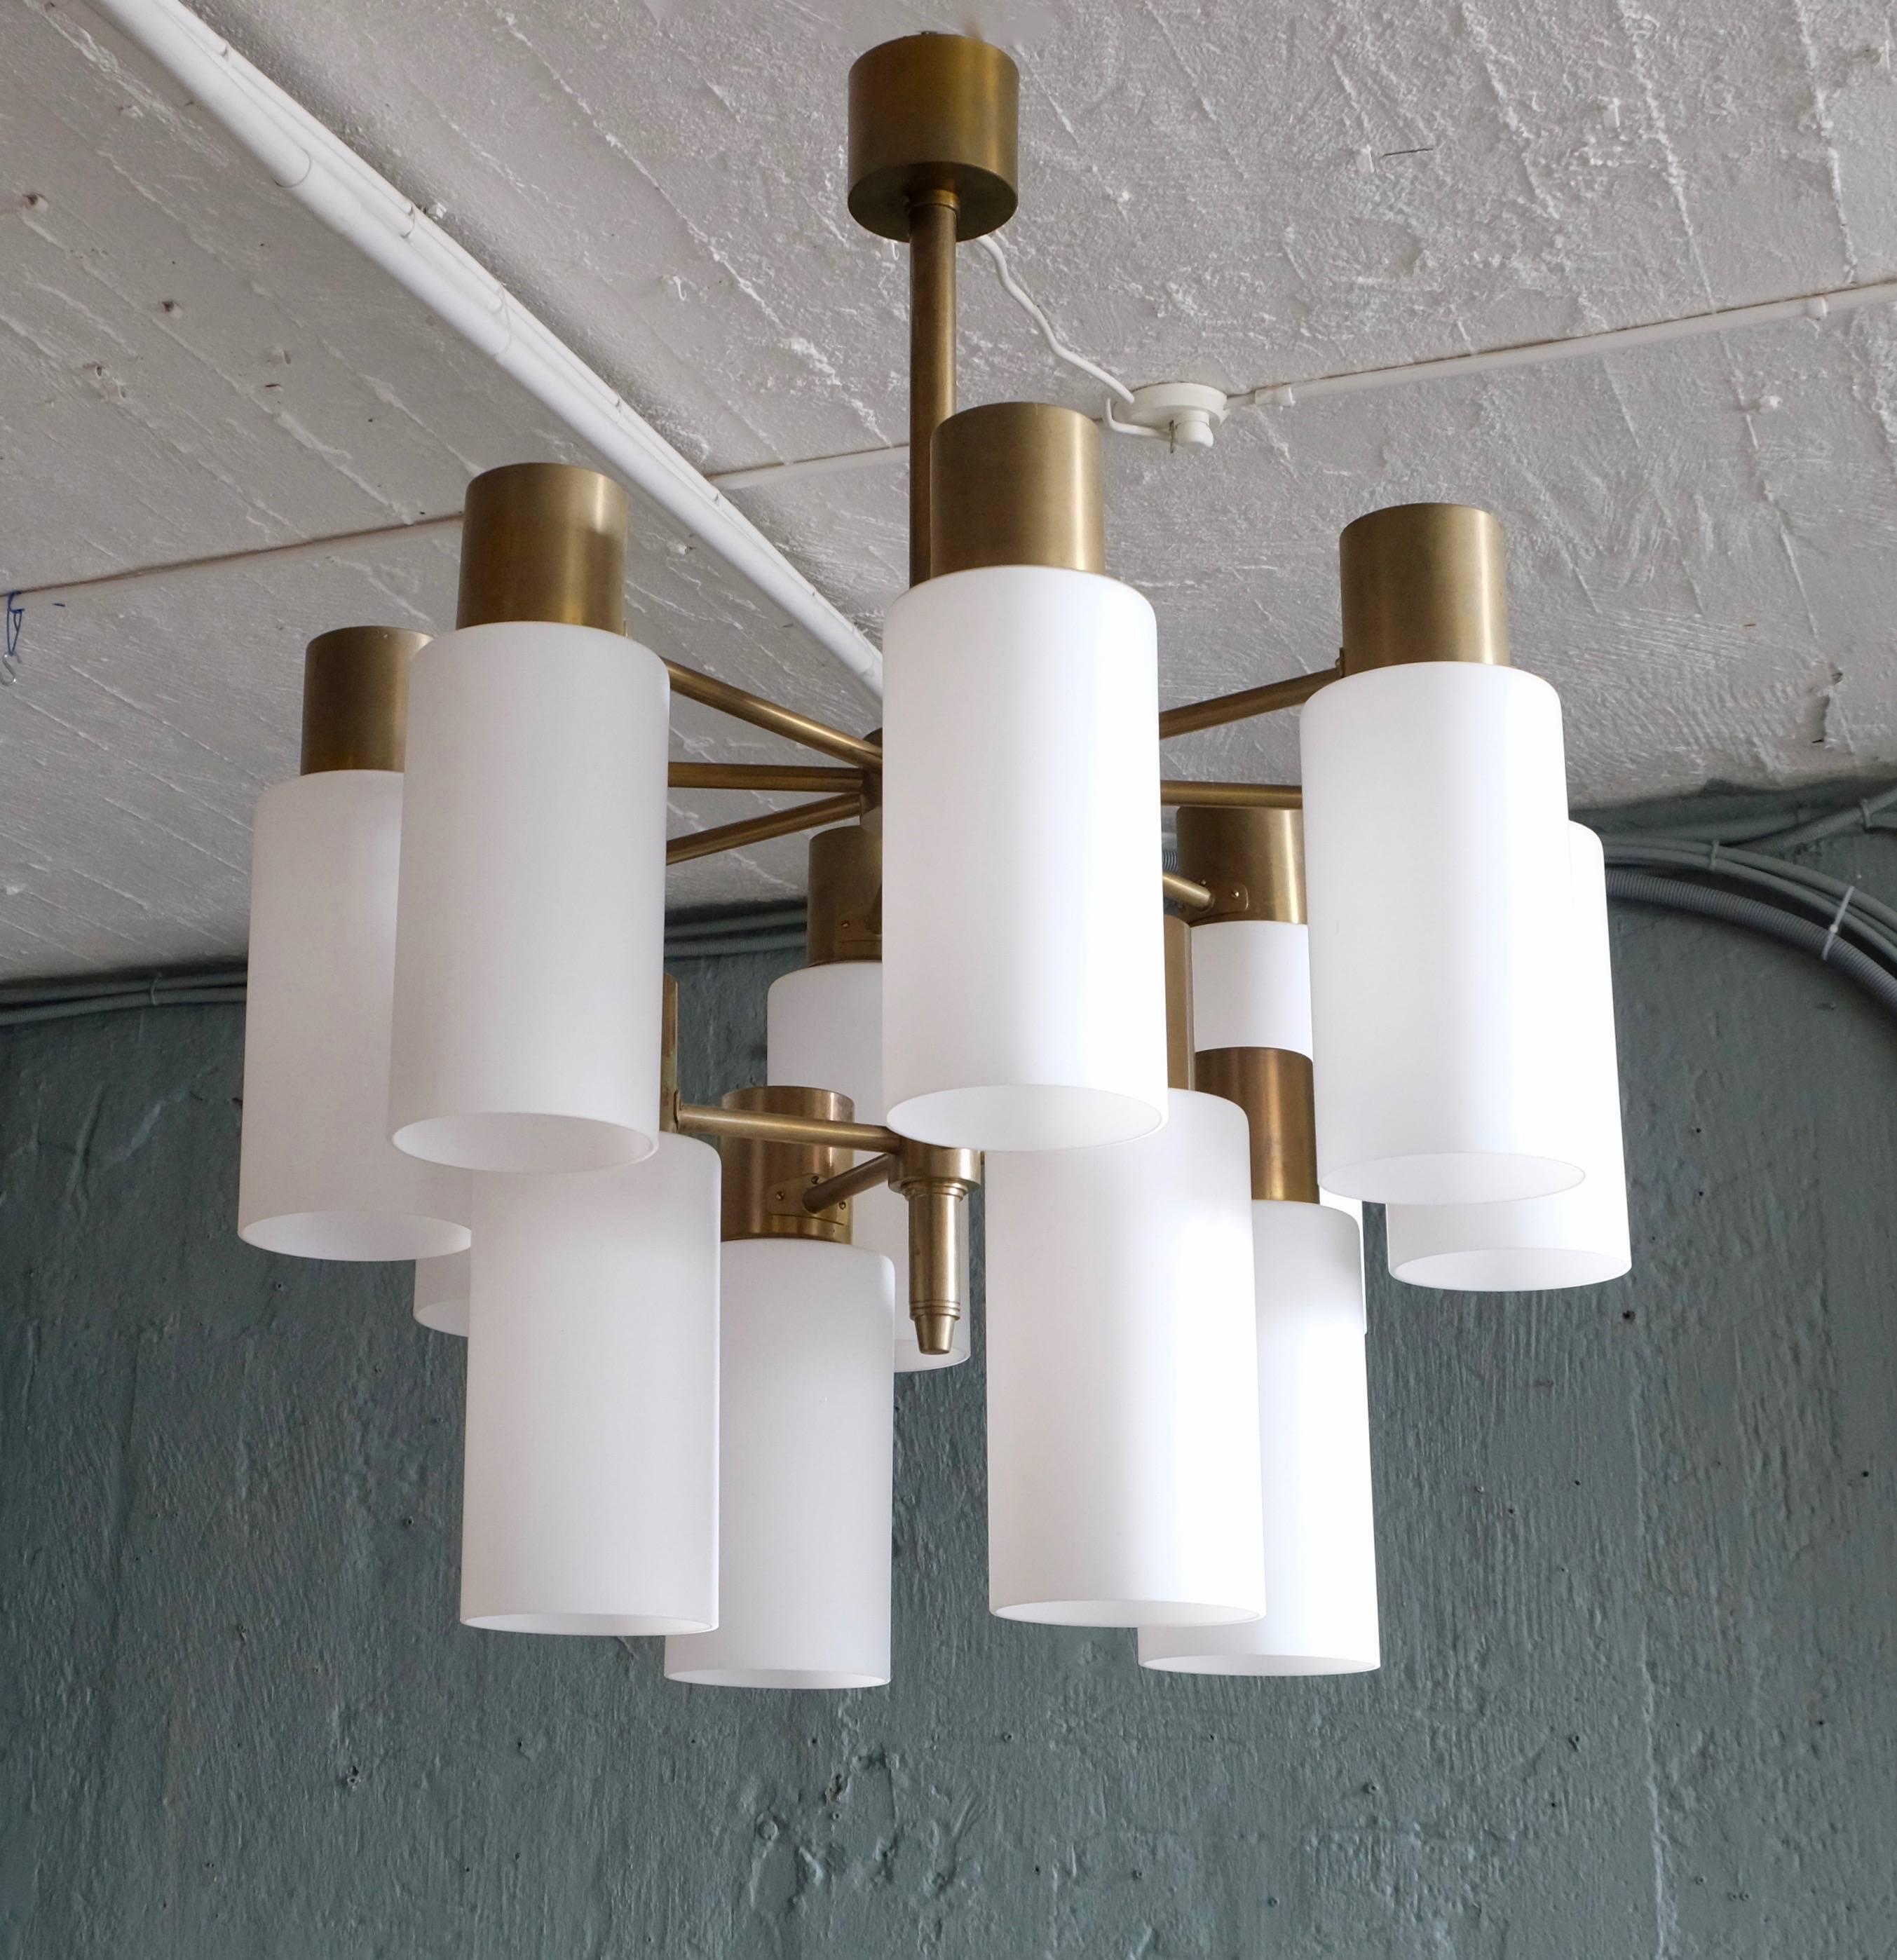 Designed by Hans-Agne Jakobsson. Produced by Hans-Agne Jakobsson AB in Markaryd, Sweden, 1960s. Excellent vintage condition. Set of two available. Listed price is for one chandelier.

Measures: 
Height: 100 cm
Diameter: 80 cm

Global front